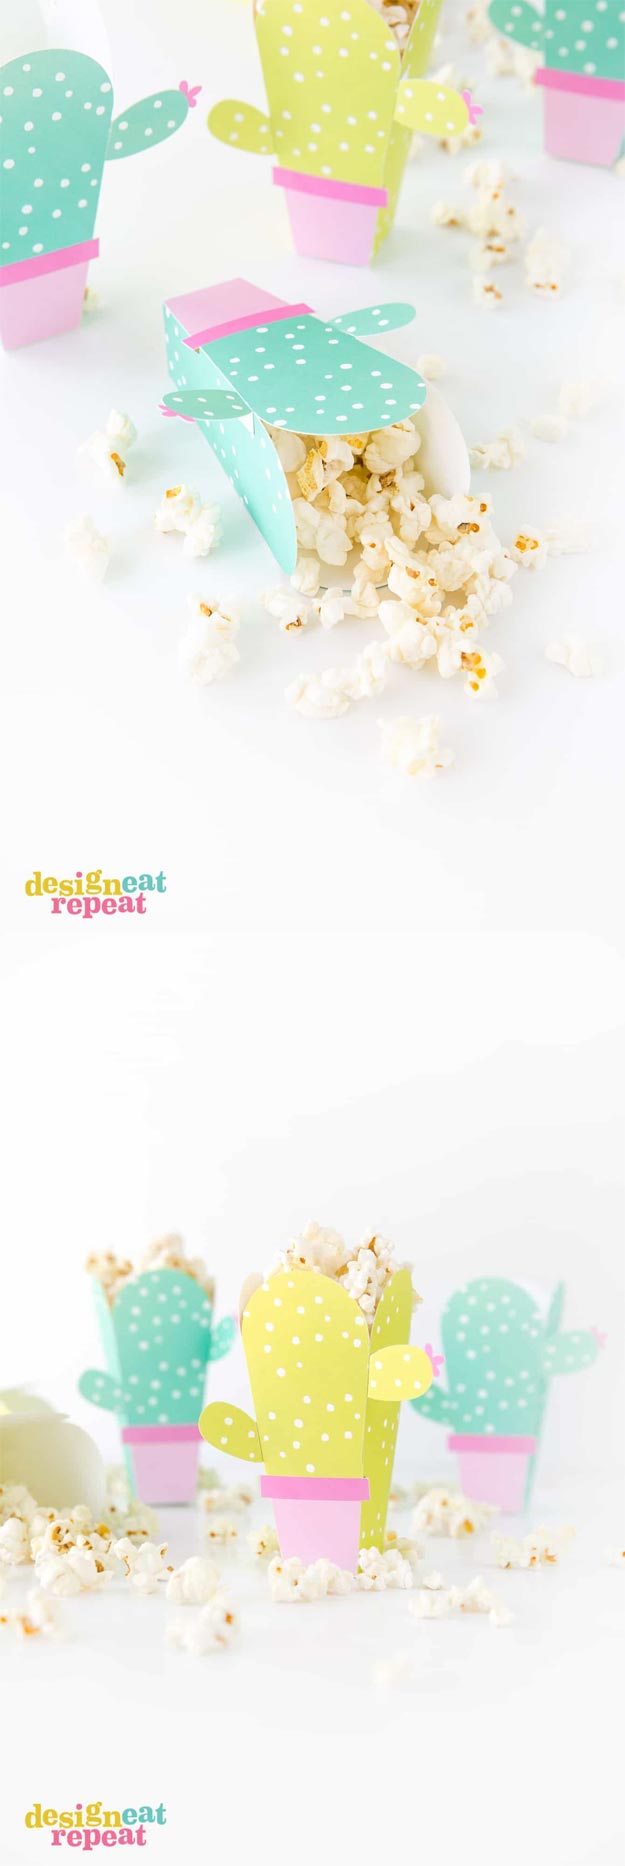 Easy Cactus Craft - DIY Printable Cactus Popcorn Box - Homemade Cactus Party Idea - Cactus Craft for Room - Crafts to do With Kids - Cute and Easy Crafts - Quick Crafts to Make at Home #diycrafts #makeandsell #cactusdecor